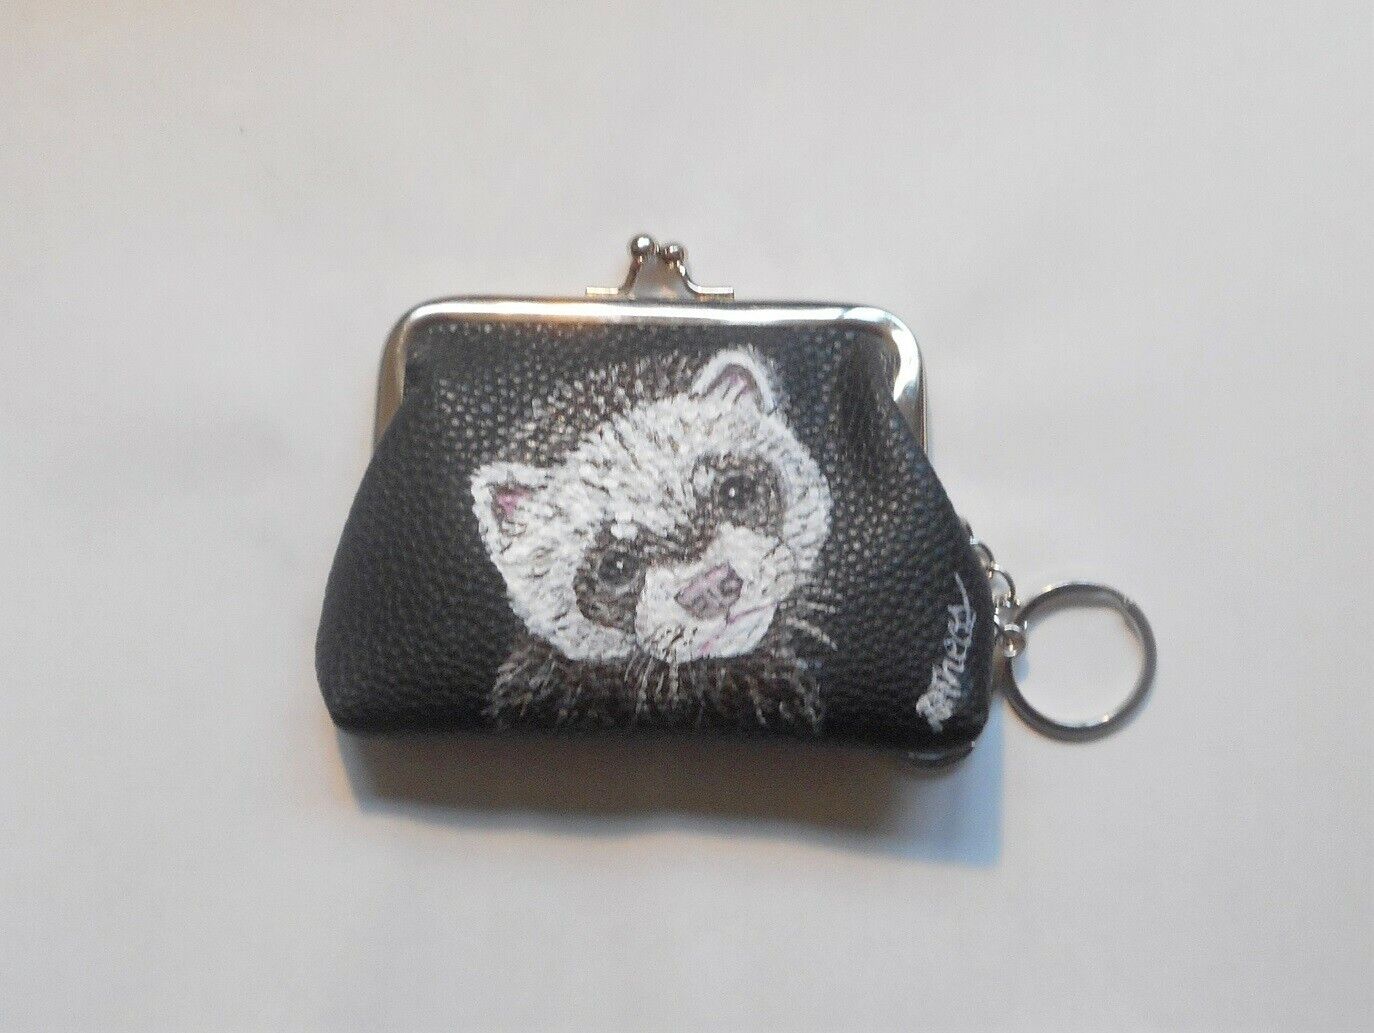 Sable Ferret Coin Change Purse With Key Chain Hand Painted